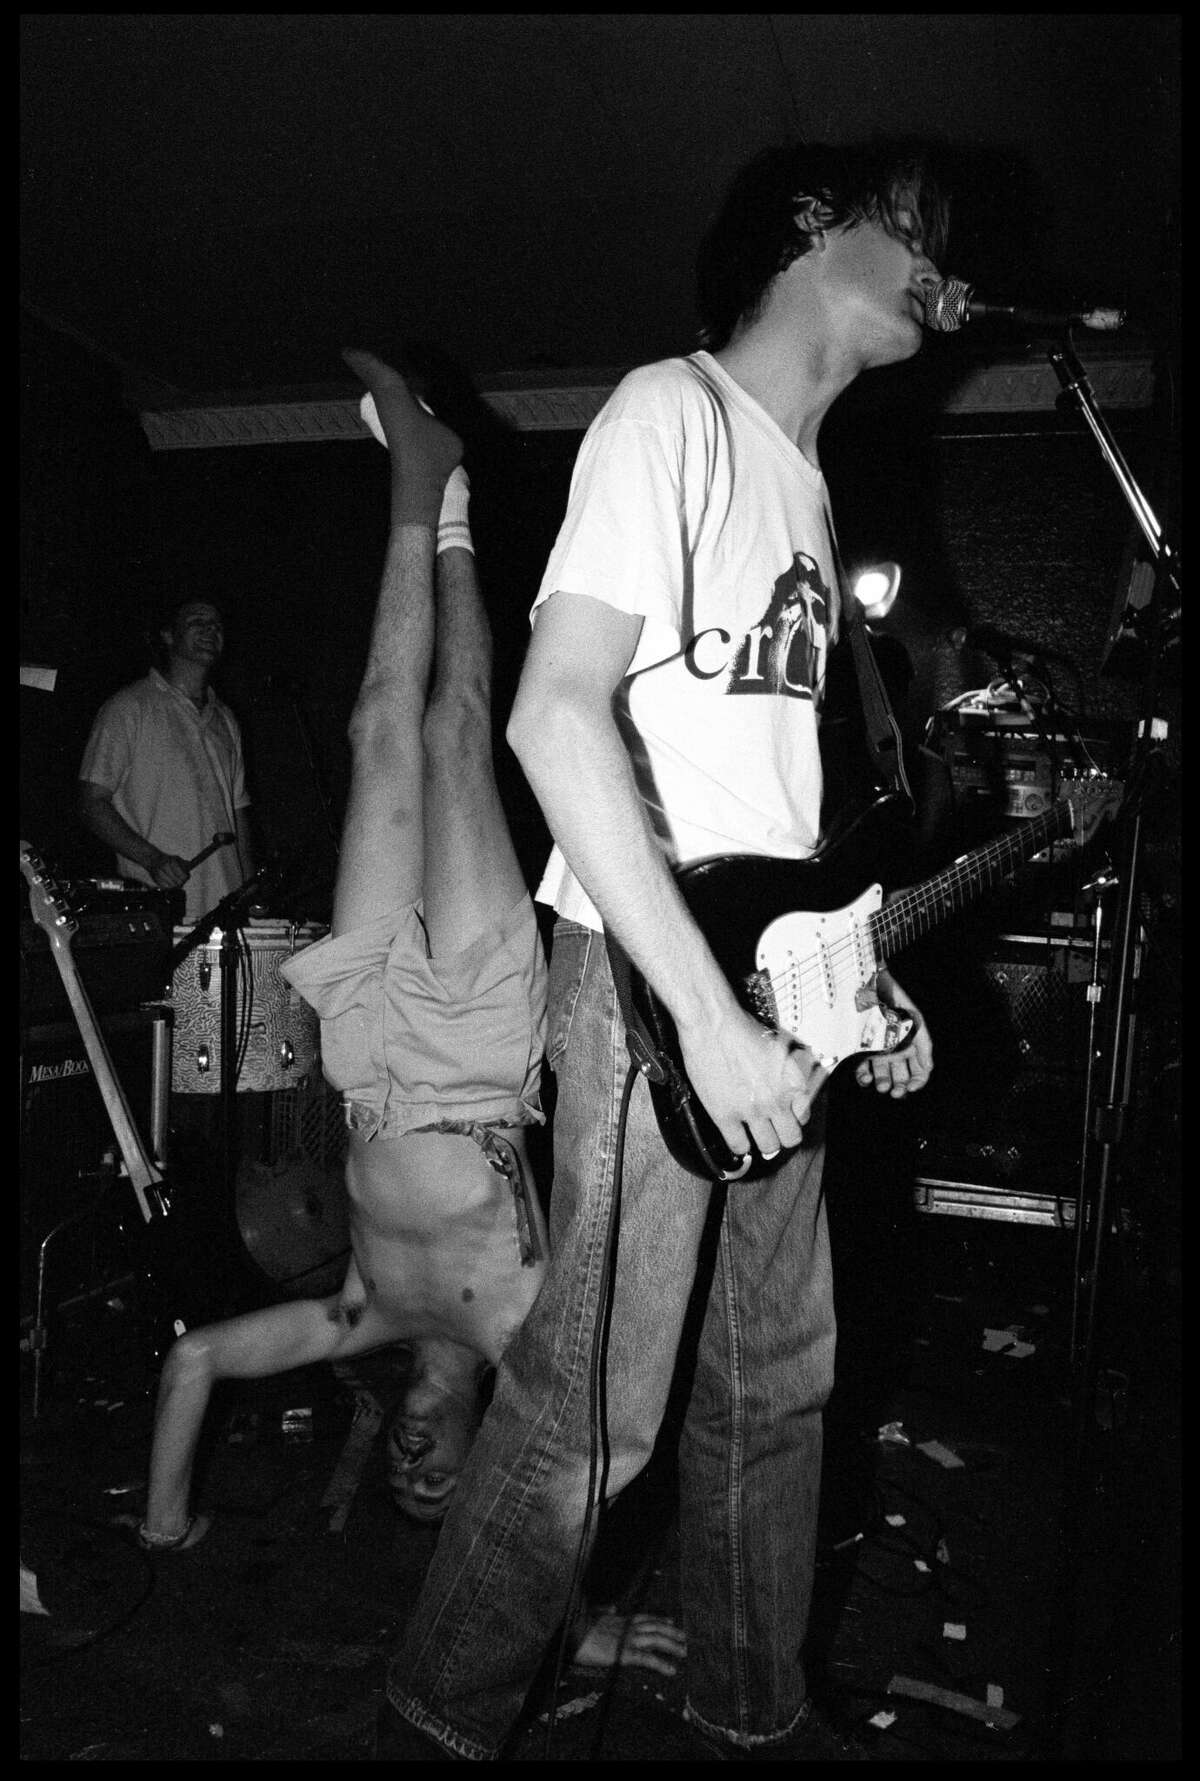 Stephen Malmus and Gary Young, standing on their heads, performing on stage in the early 1990s. 